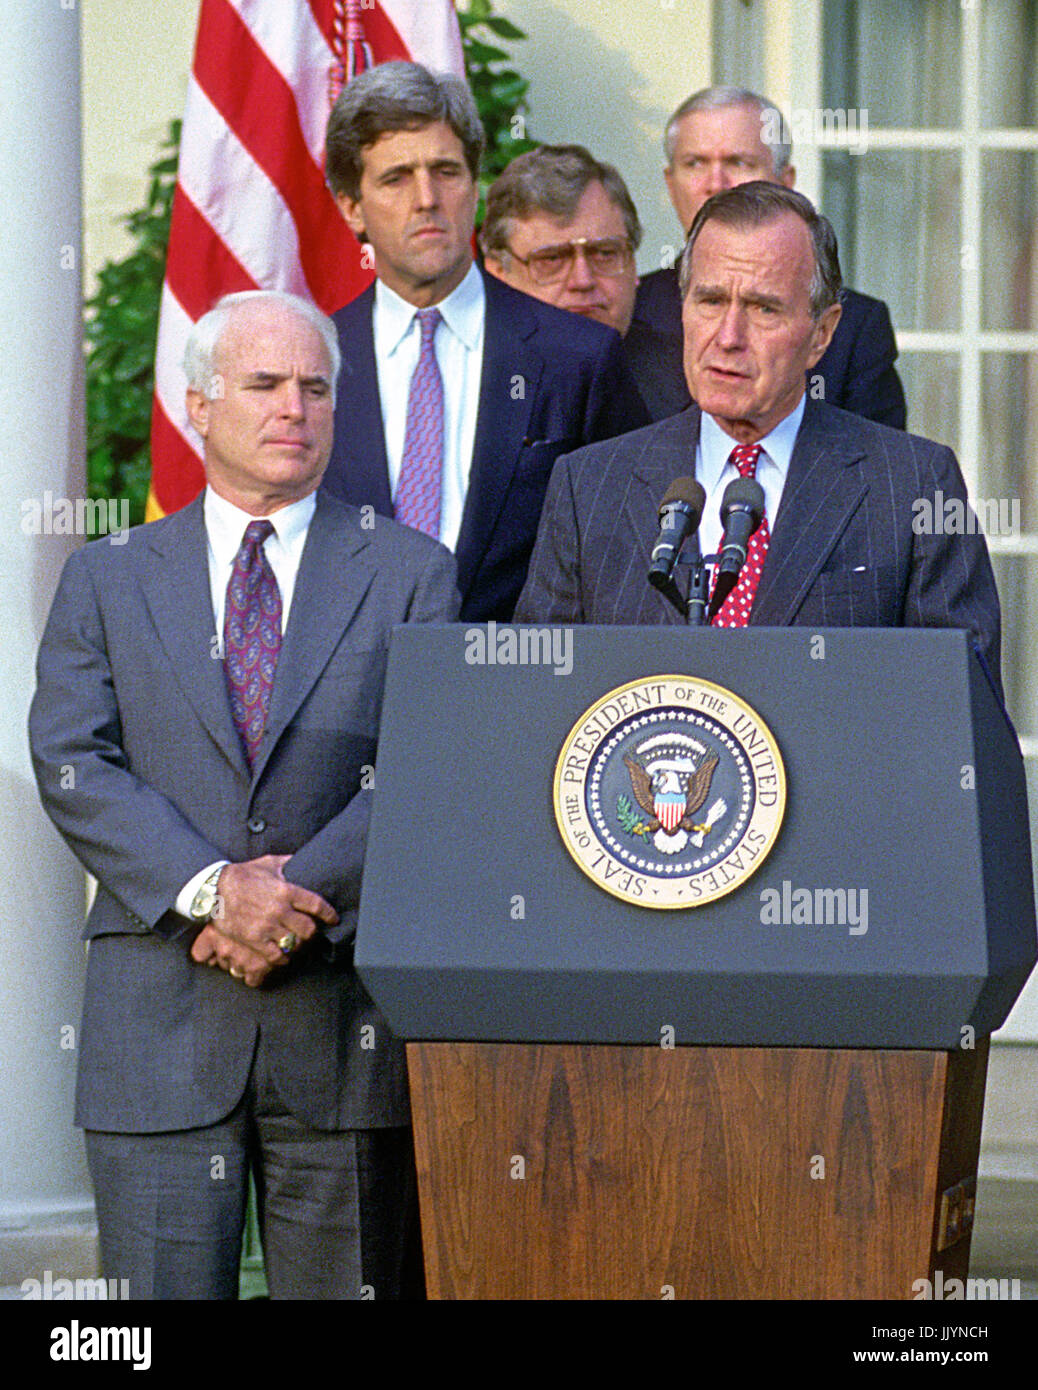 Washington, DC - (FILE) -- United States President George H.W. Bush announces the Government of Vietnam has agreed to make available all information including photographs, artifacts, and military documents on United States prisoners of war (POWs) and those missing in action (MIAs) in the Rose Garden of the White House on Friday, October 23, 1992. Pictured from left to right: United States Senator John McCain (Republican of Arizona); United States Senator John F. Kerry (Democrat of Massachusetts); United States Secretary of State Lawrence Eagleburger; Director of Central Intelligence Robert M. Stock Photo